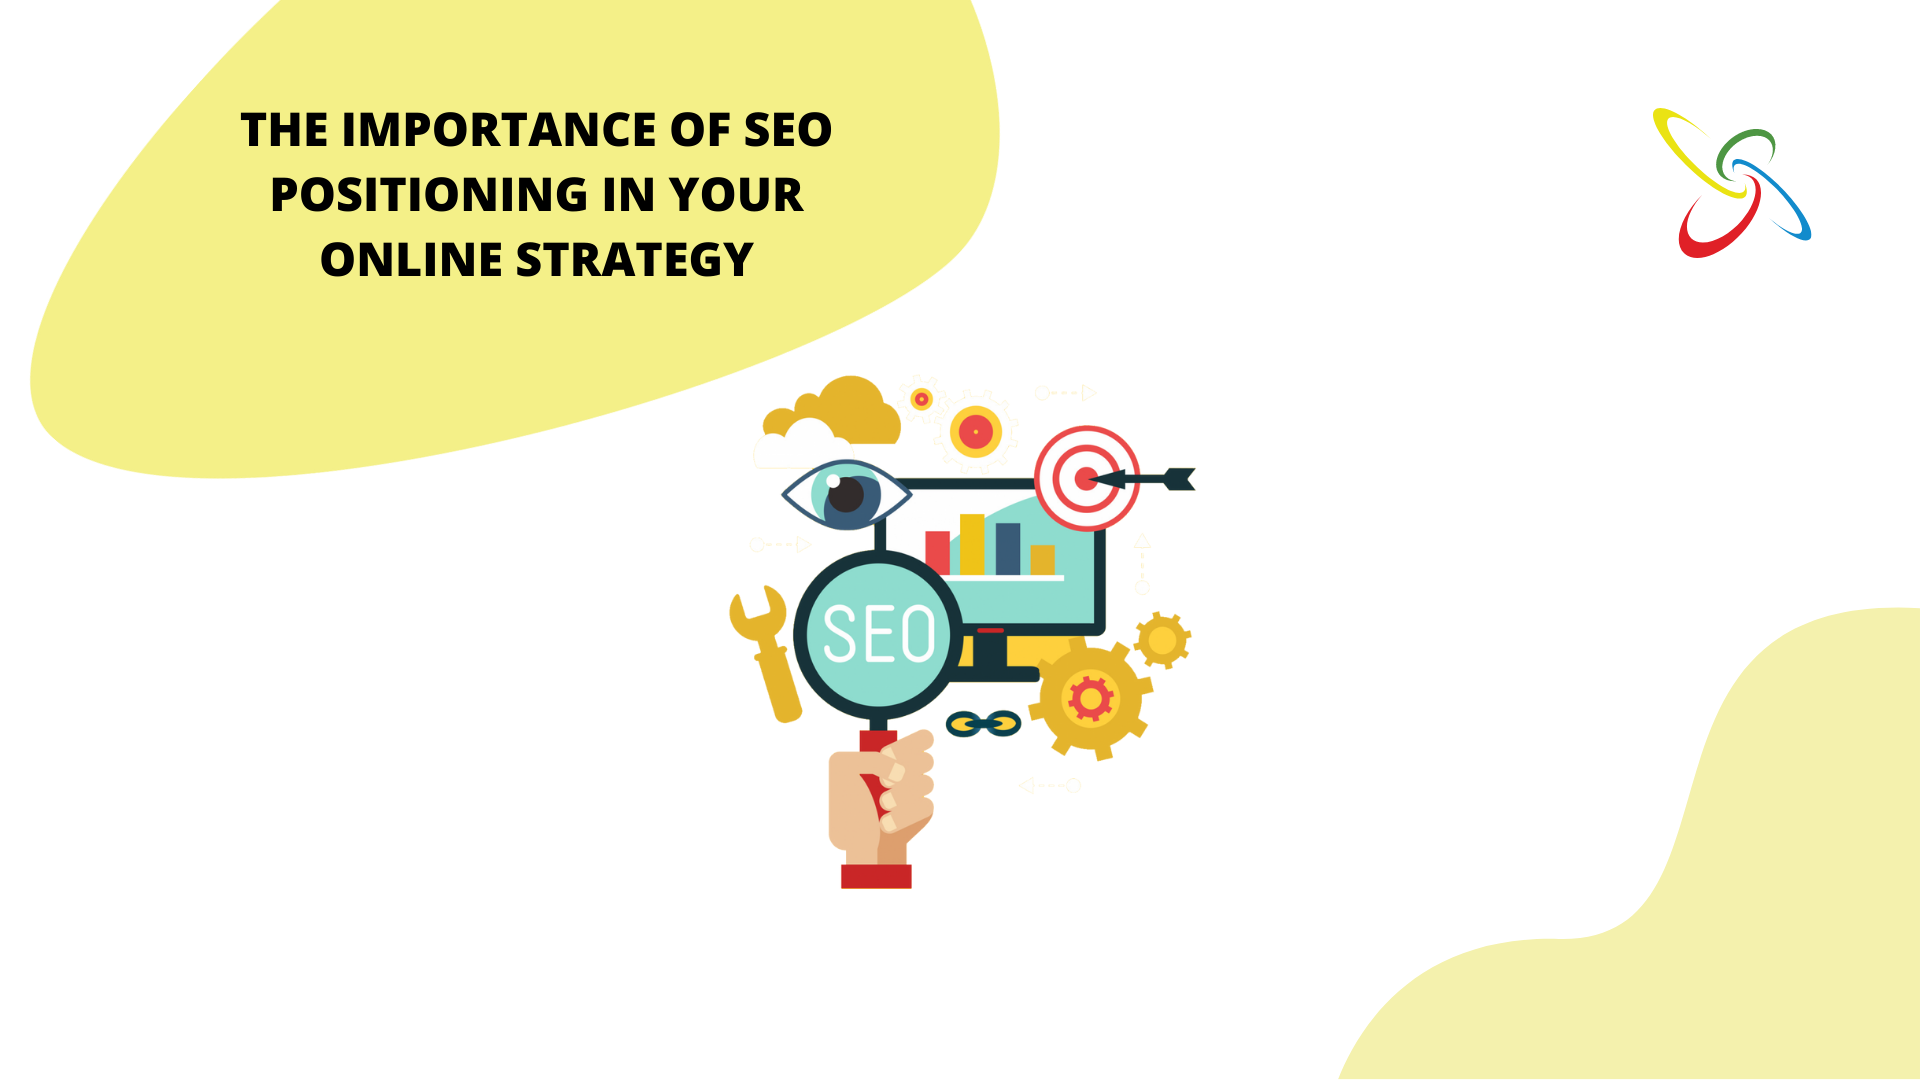 The importance of SEO positioning in your online strategy